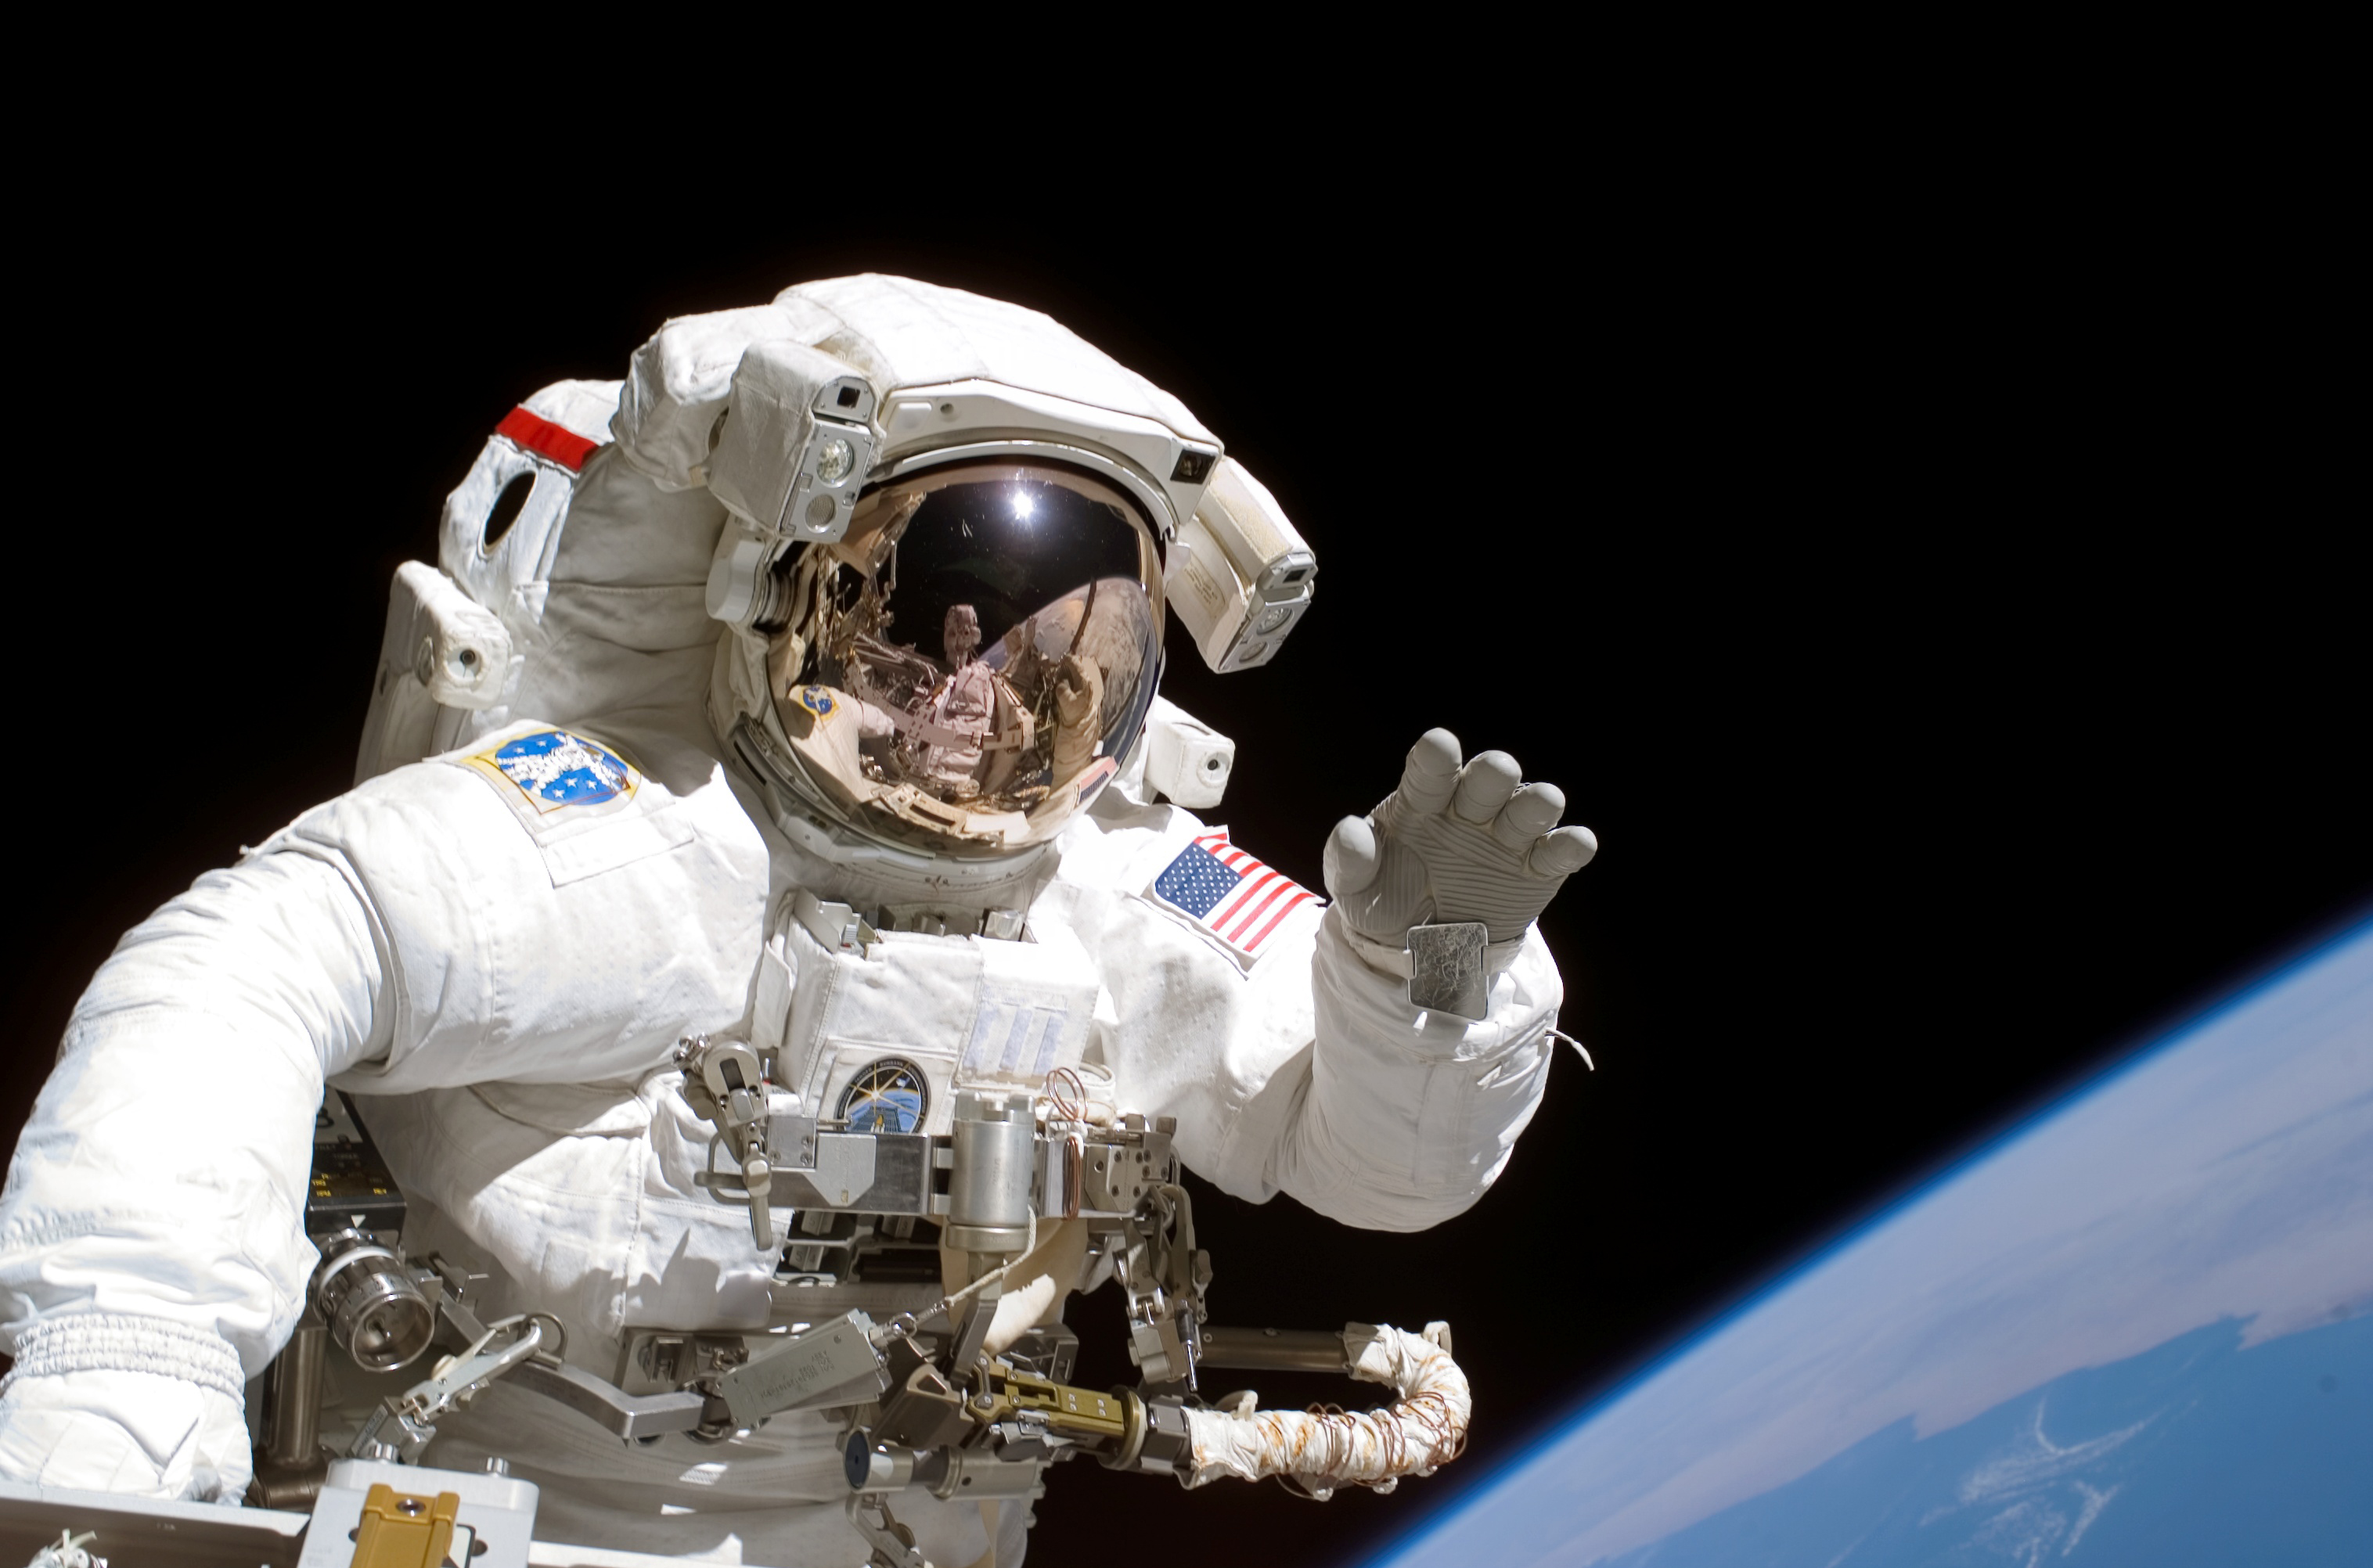 Space Shuttle Astronaut on Spacewalk (STS-115) | National Air and ...